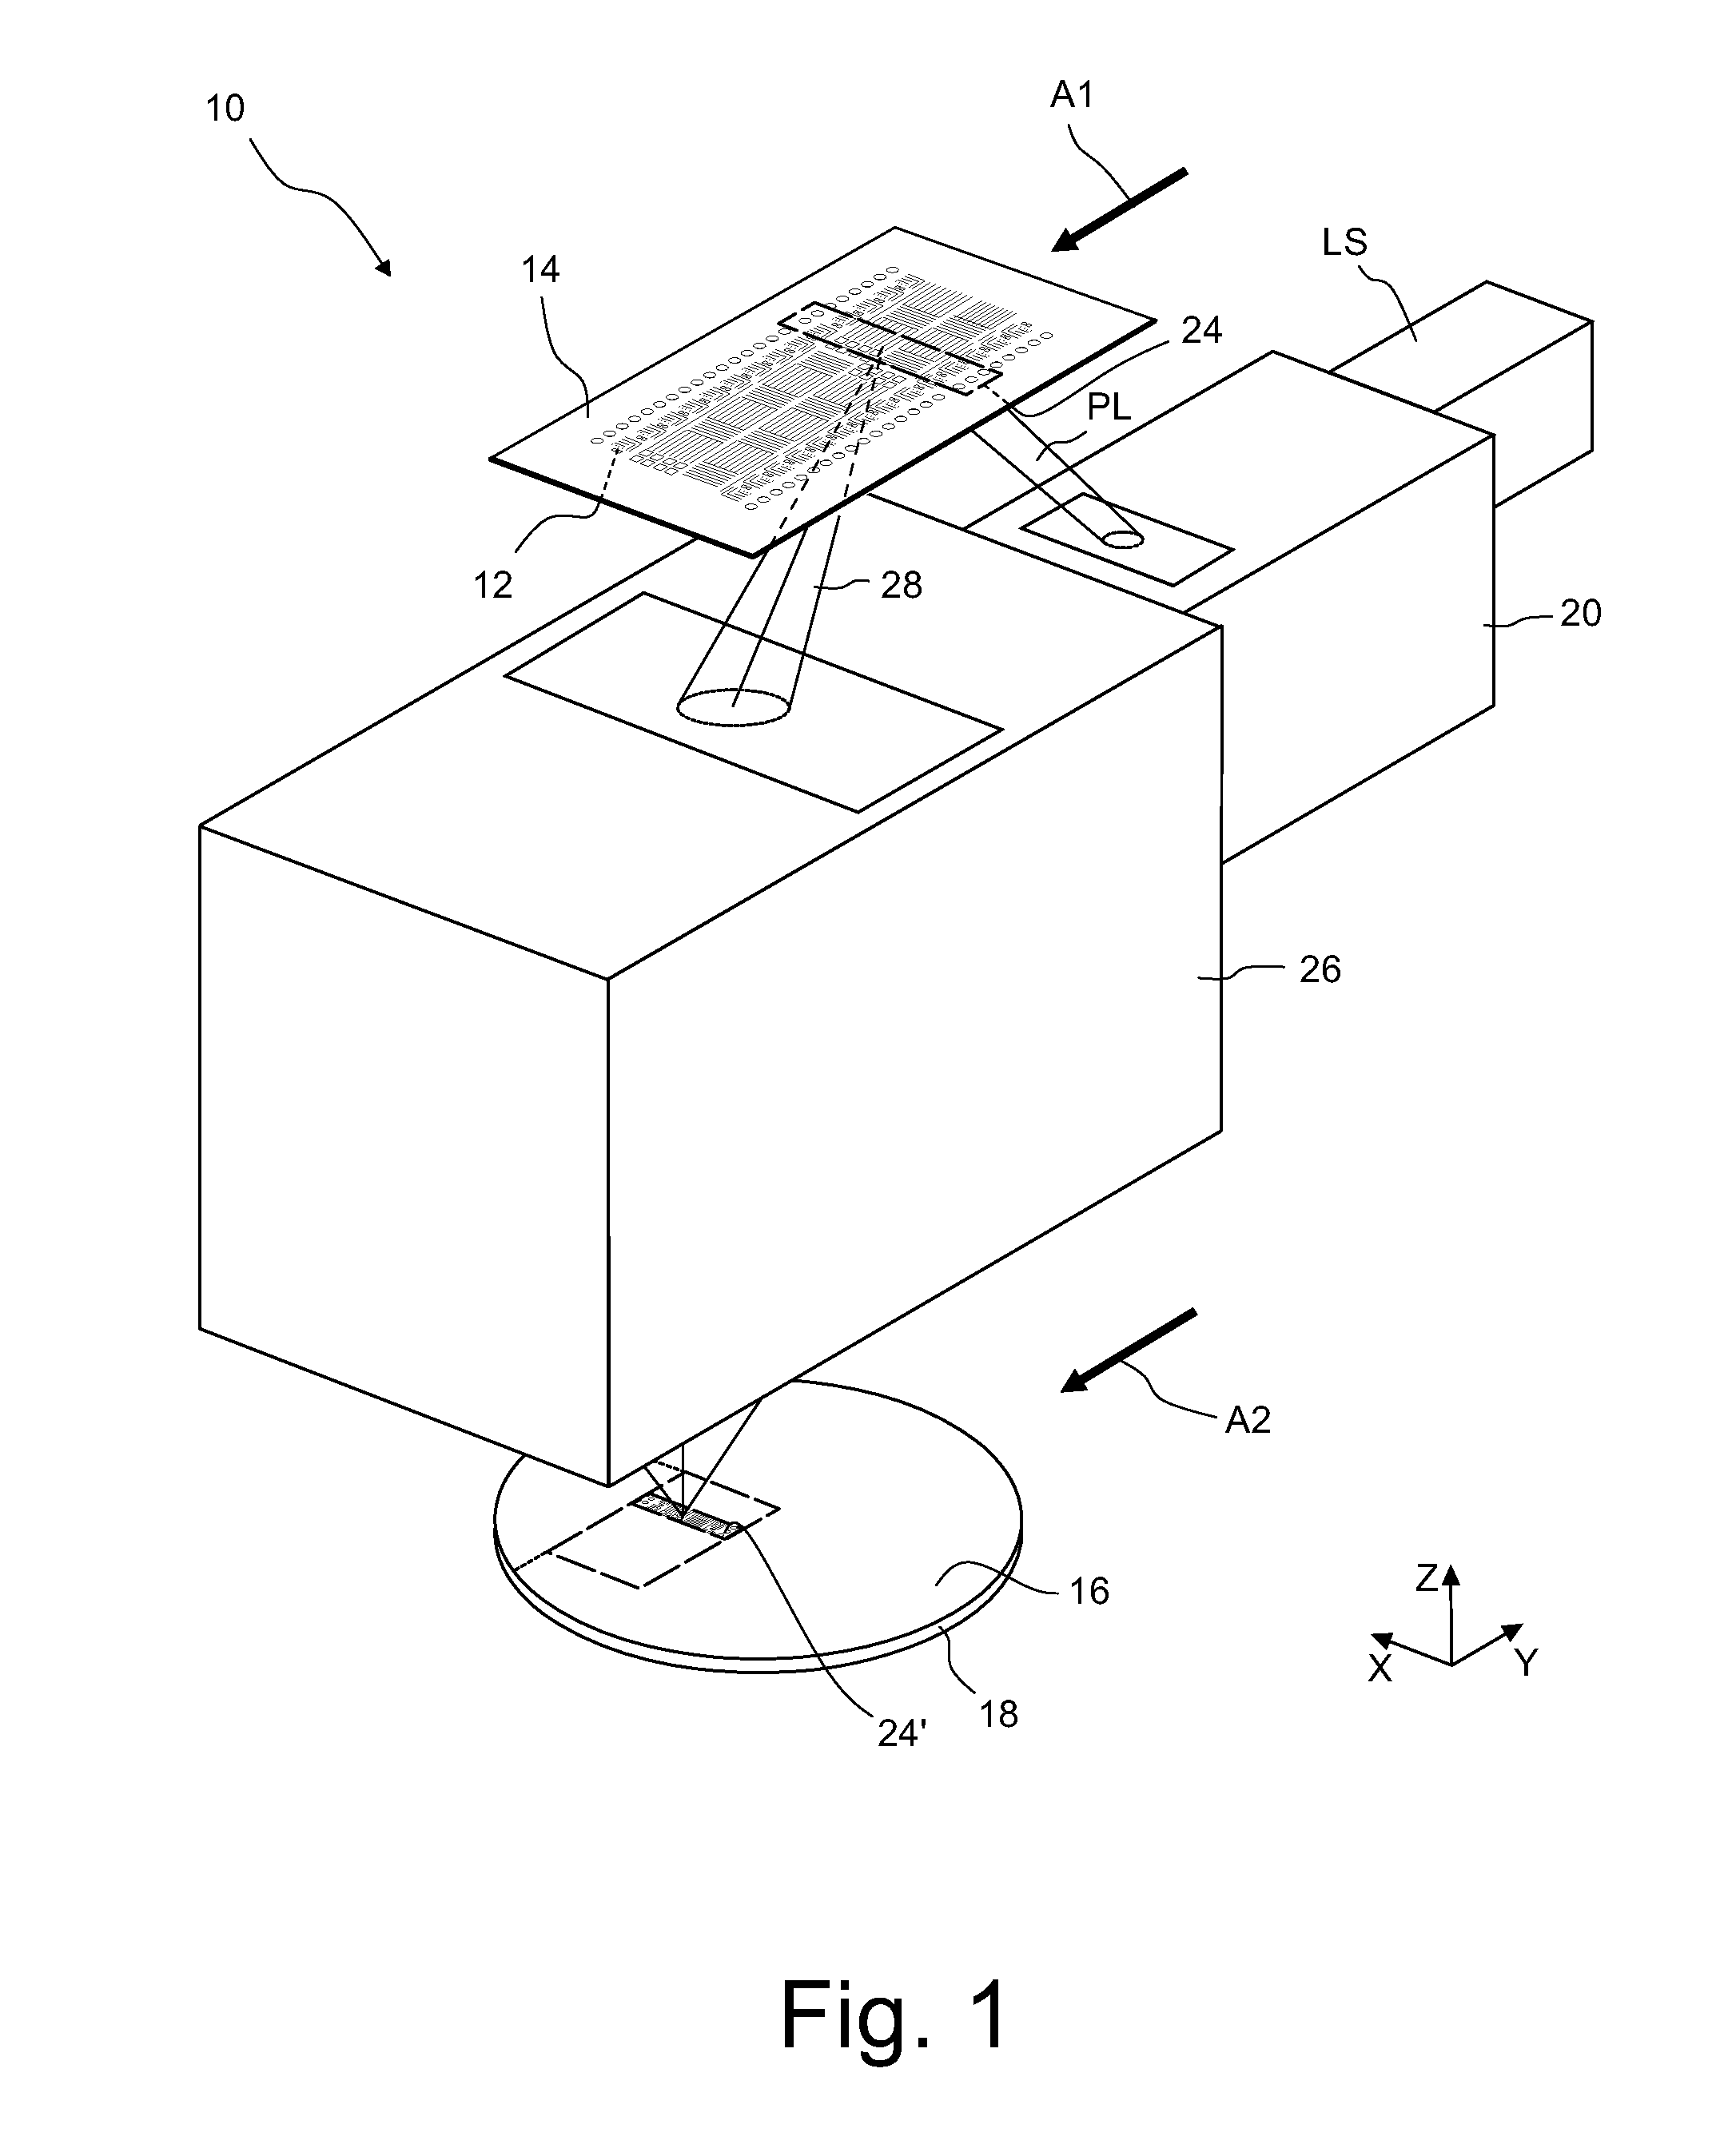 Method of operating a microlithographic apparatus